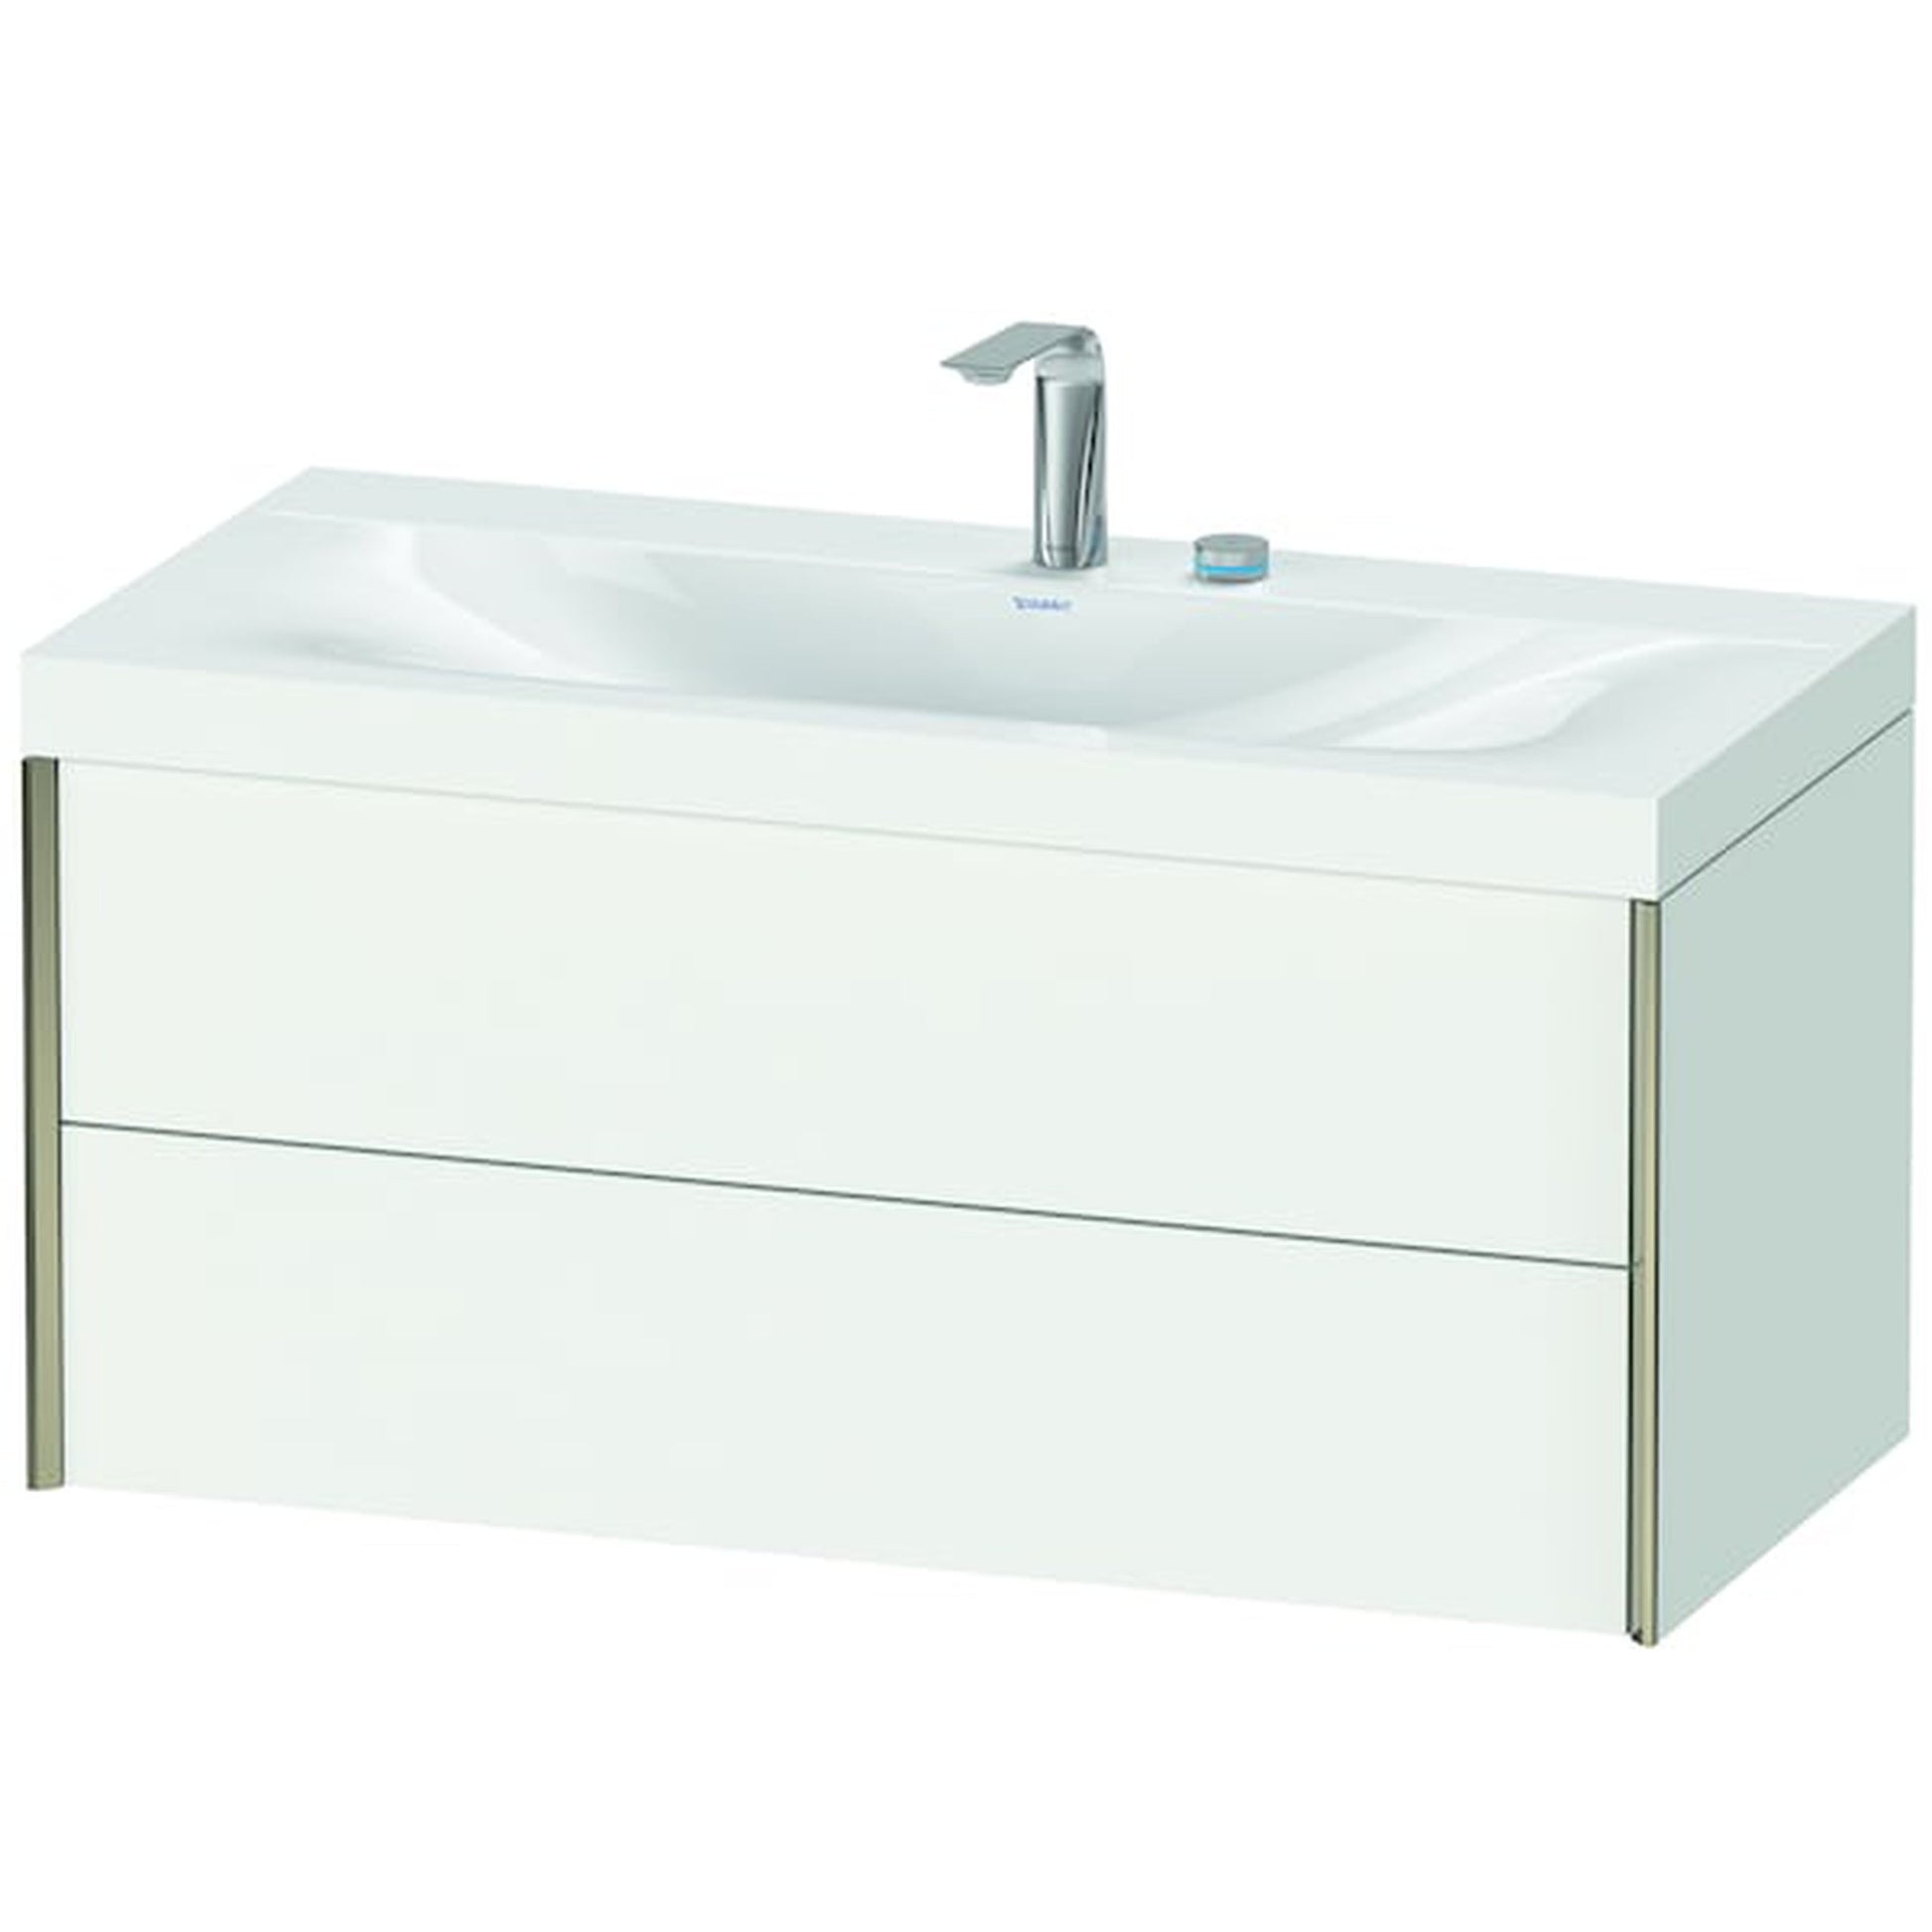 Duravit Xviu 39" x 20" x 19" Two Drawer C-Bonded Wall-Mount Vanity Kit With Two Tap Holes, White (XV4616EB118C)